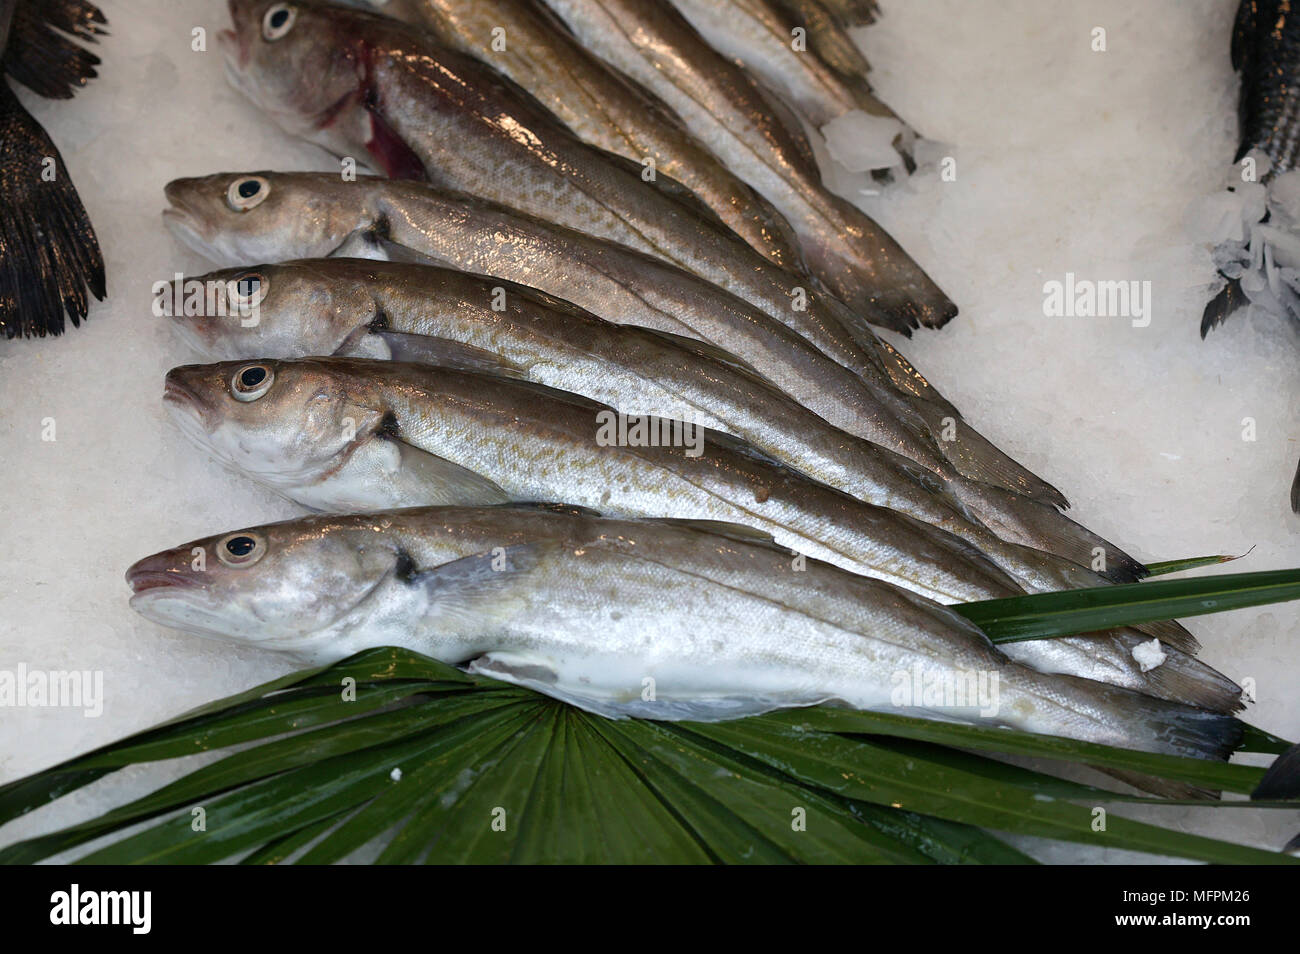 Small Hake, pollachius sp., Fresh Fishes on Ice at Fish Stall Stock Photo